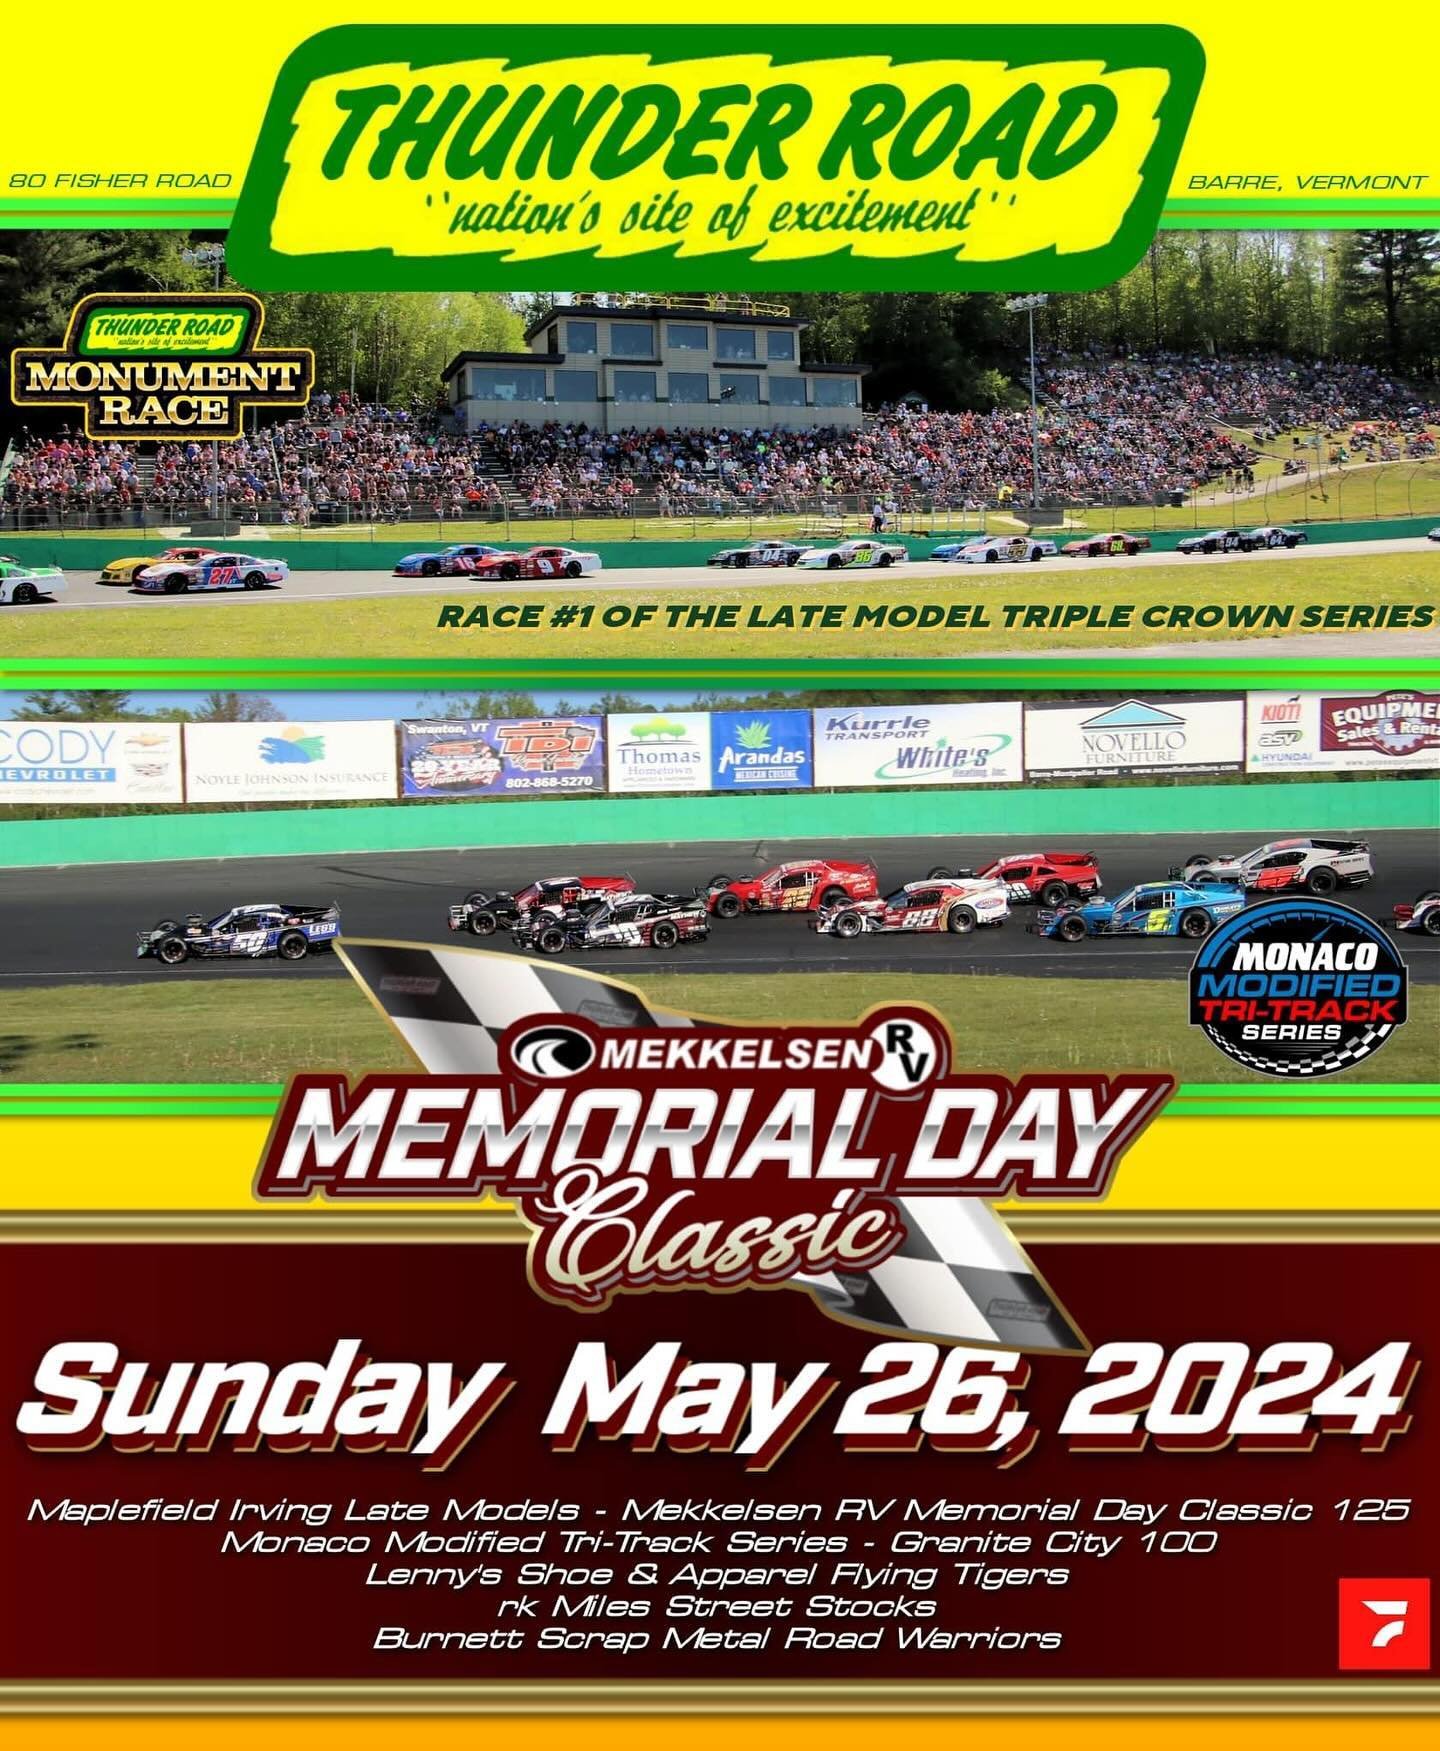 61st running of the Mekkelsen RV Memorial Day Classic at the Thunder Road International Speedbowl on Sunday May 26th!

🔴 Maplefield Irving Late Models - Mekkelsen RV 125 &amp; Race No. 1 of the Triple Crown Series
⚪️ Monaco Modified Tri-Track Series